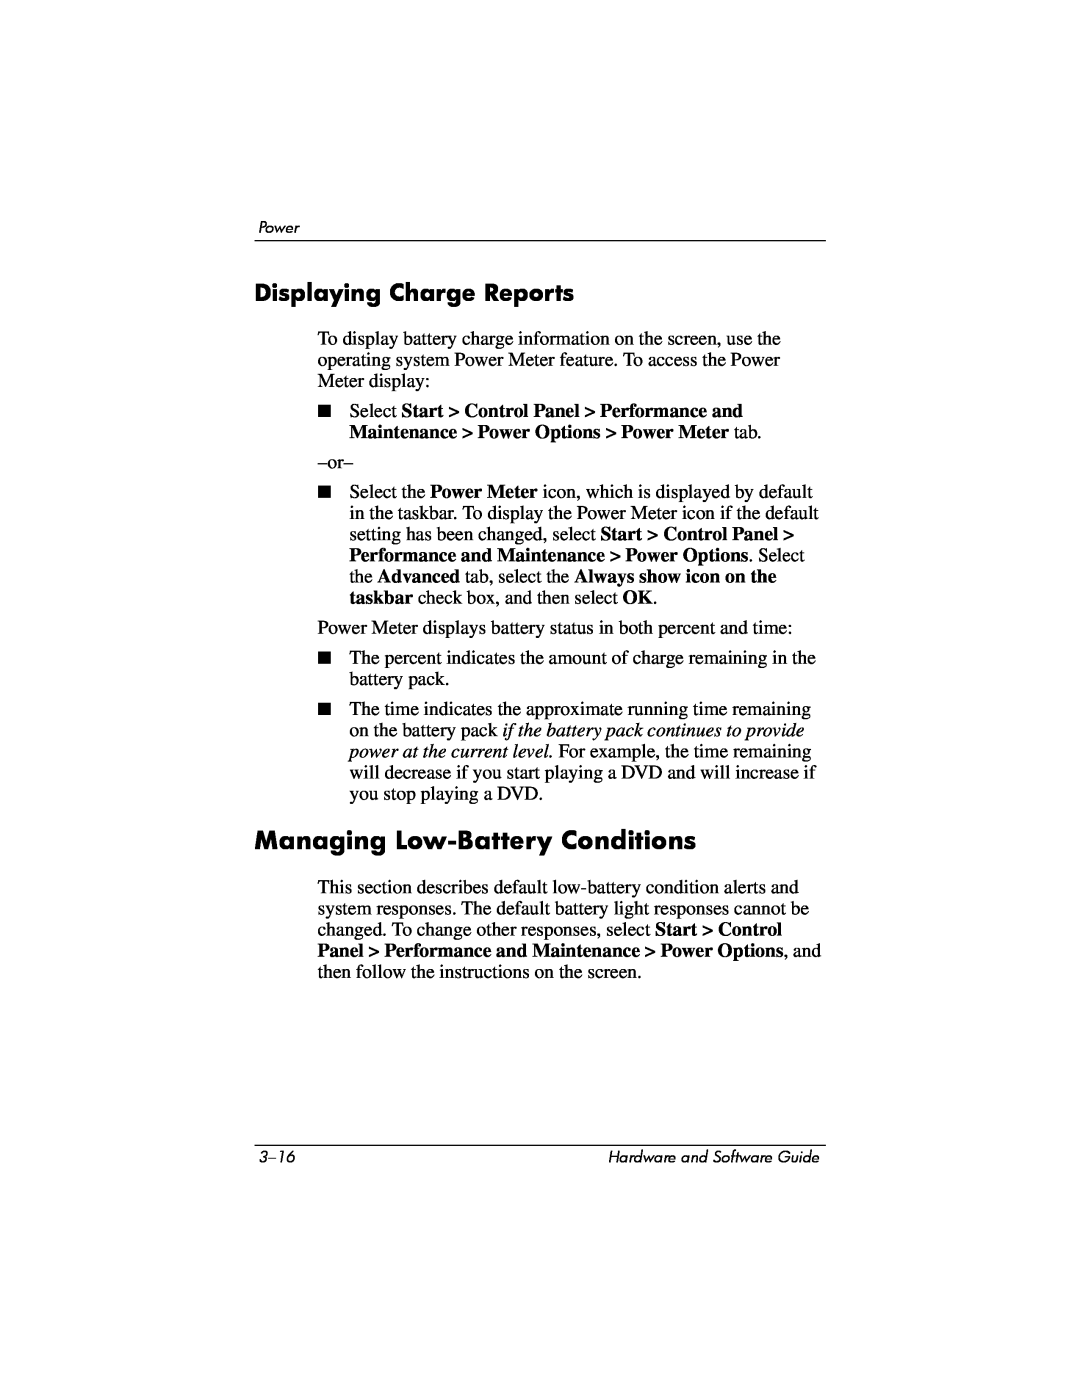 Compaq Presario M2000 manual Managing Low-Battery Conditions, Displaying Charge Reports 